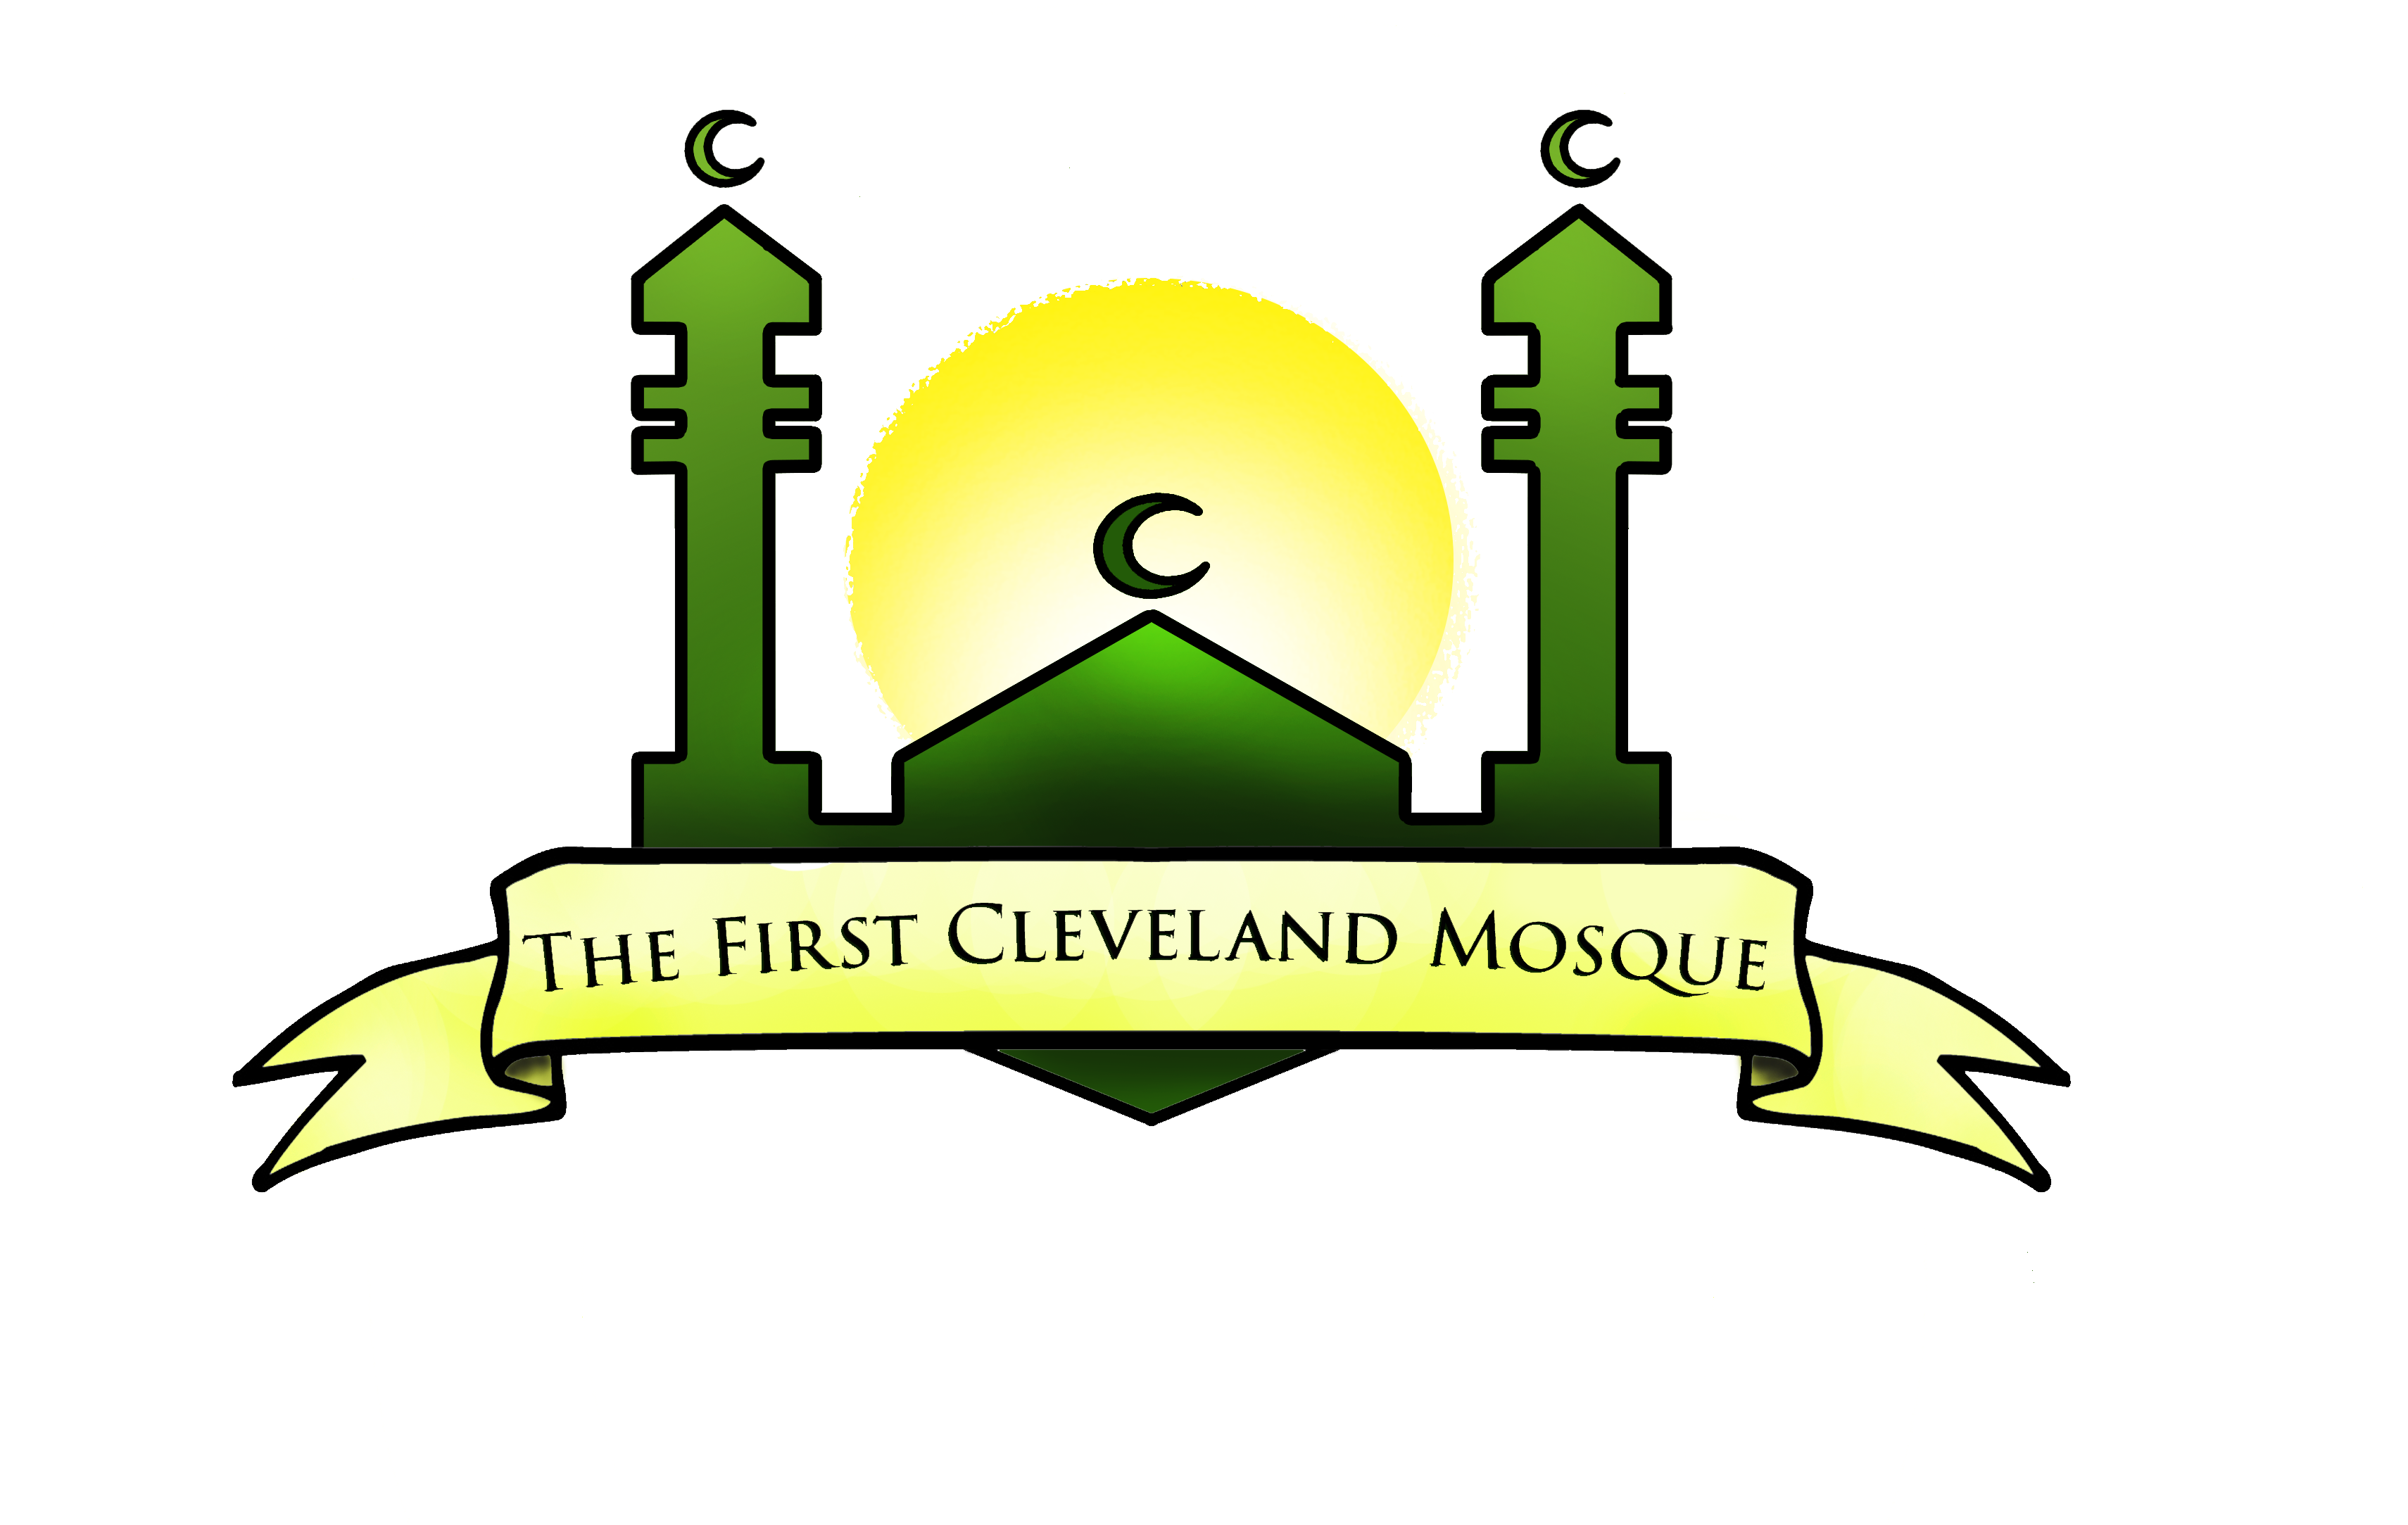 Welcome To First Cleveland Mosque - First Cleveland Mosque (3440x2264)